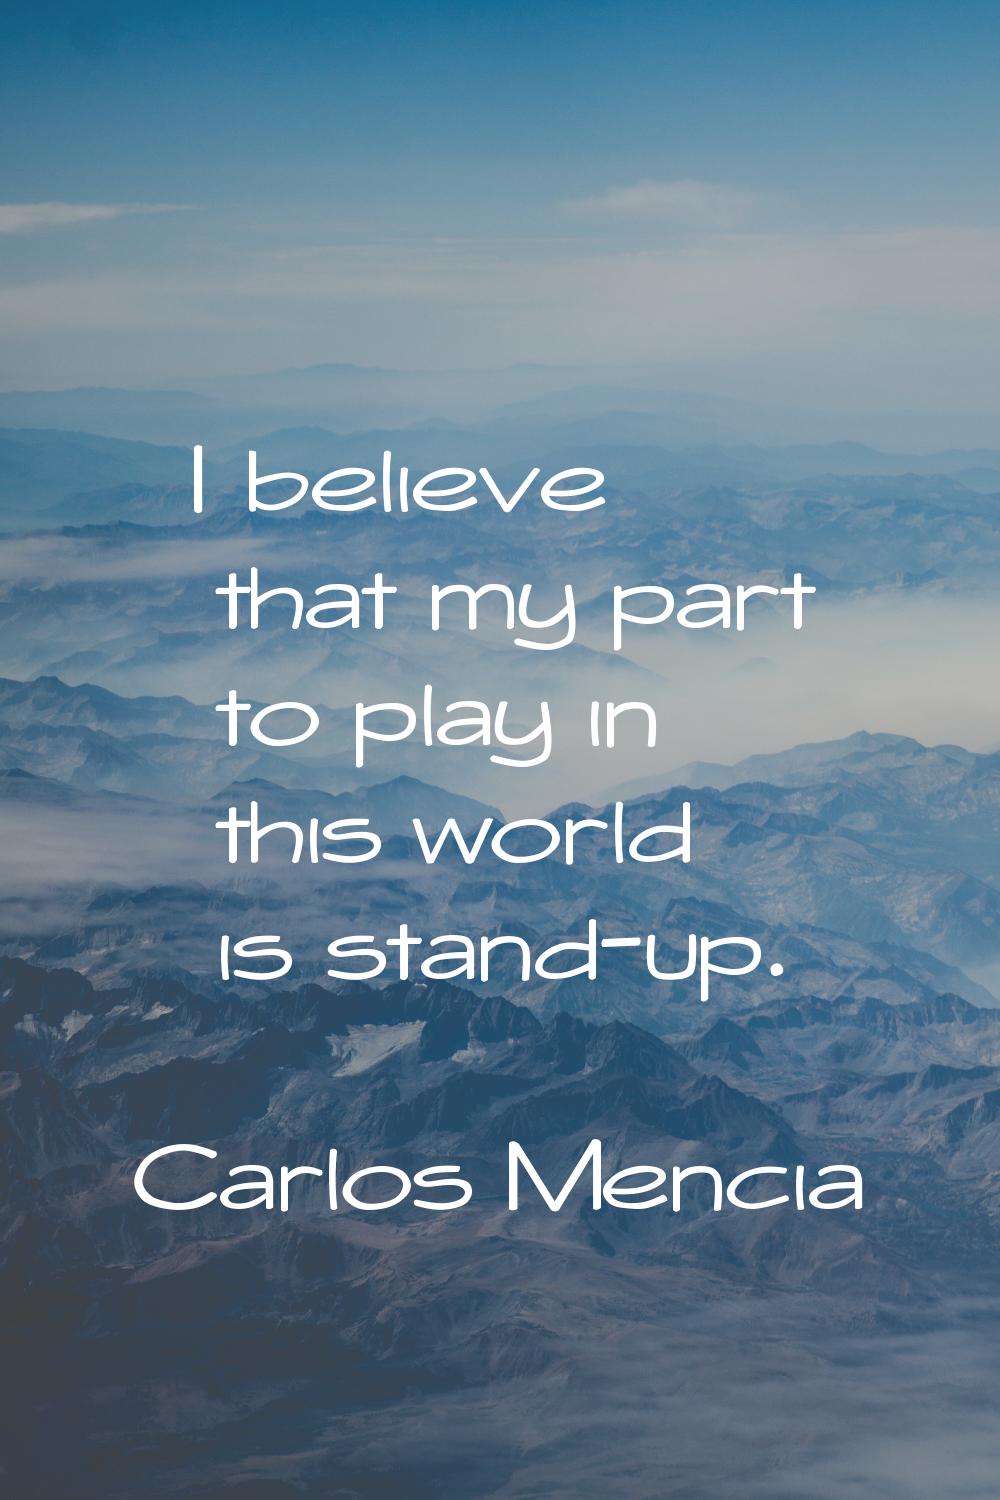 I believe that my part to play in this world is stand-up.